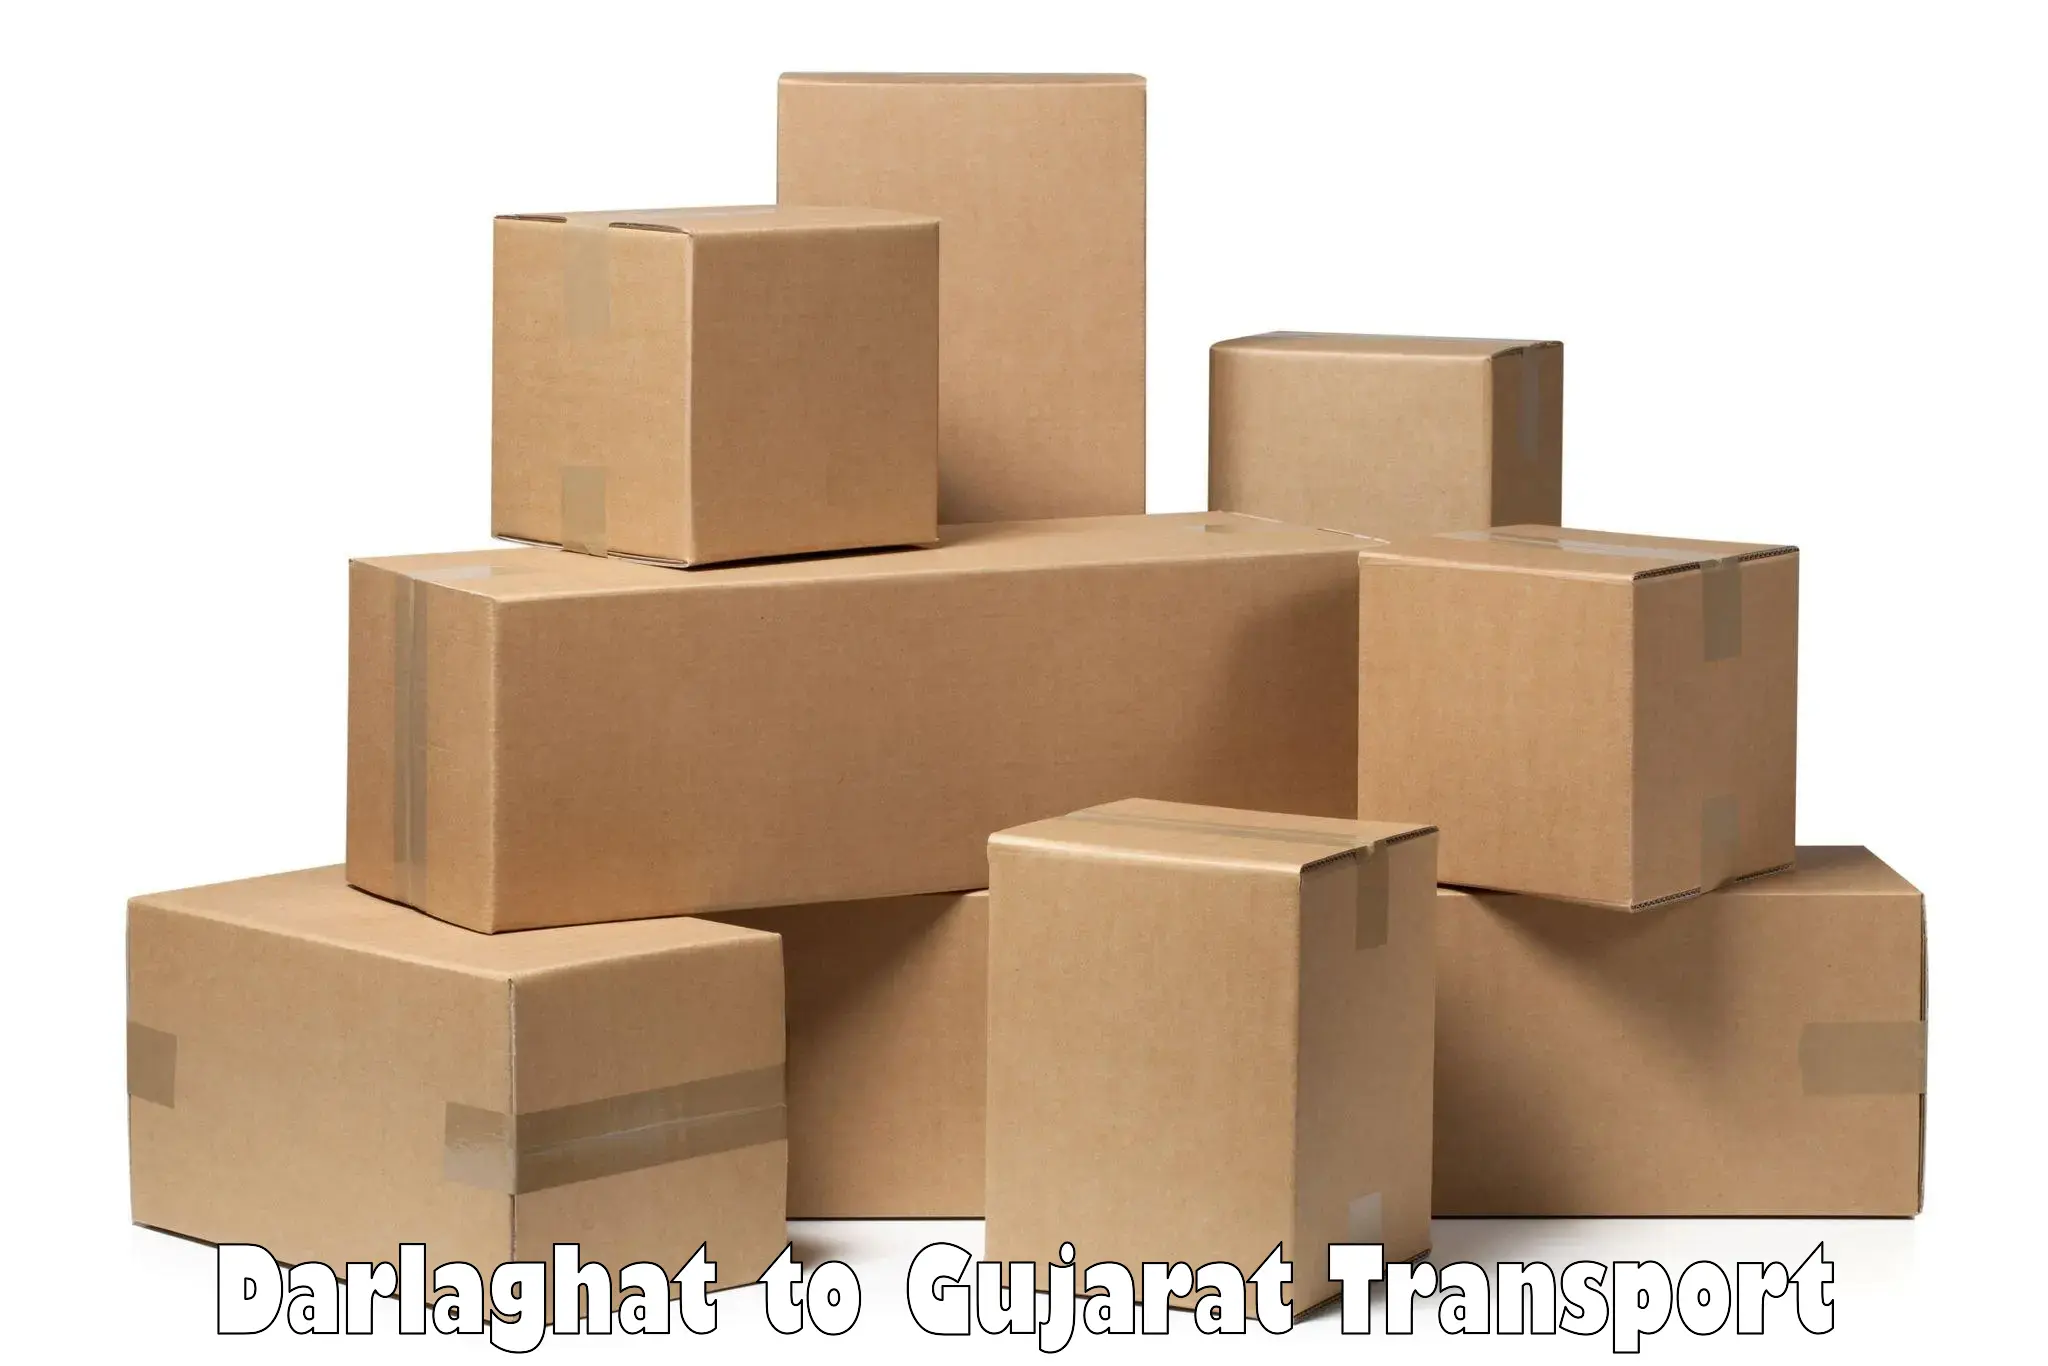 Daily parcel service transport Darlaghat to Patan Gujarat